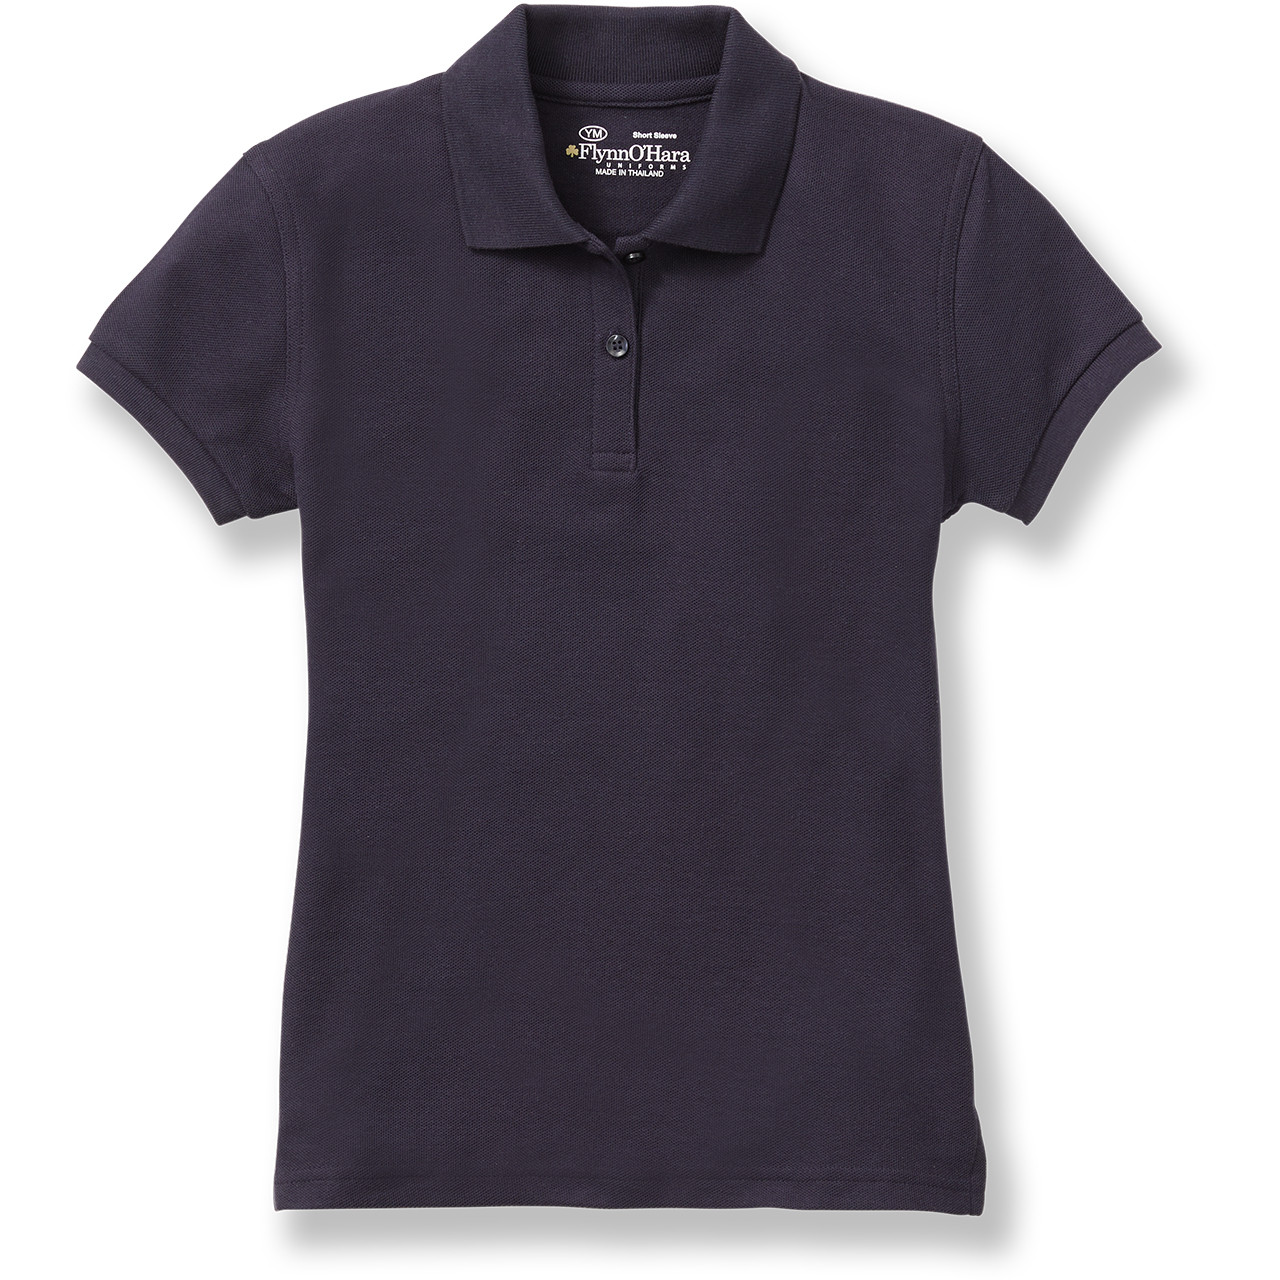 Ladies' Fit Polo Shirt with embroidered logo [DC036-9708-WLP-DK NAVY] -  FlynnO'Hara Uniforms